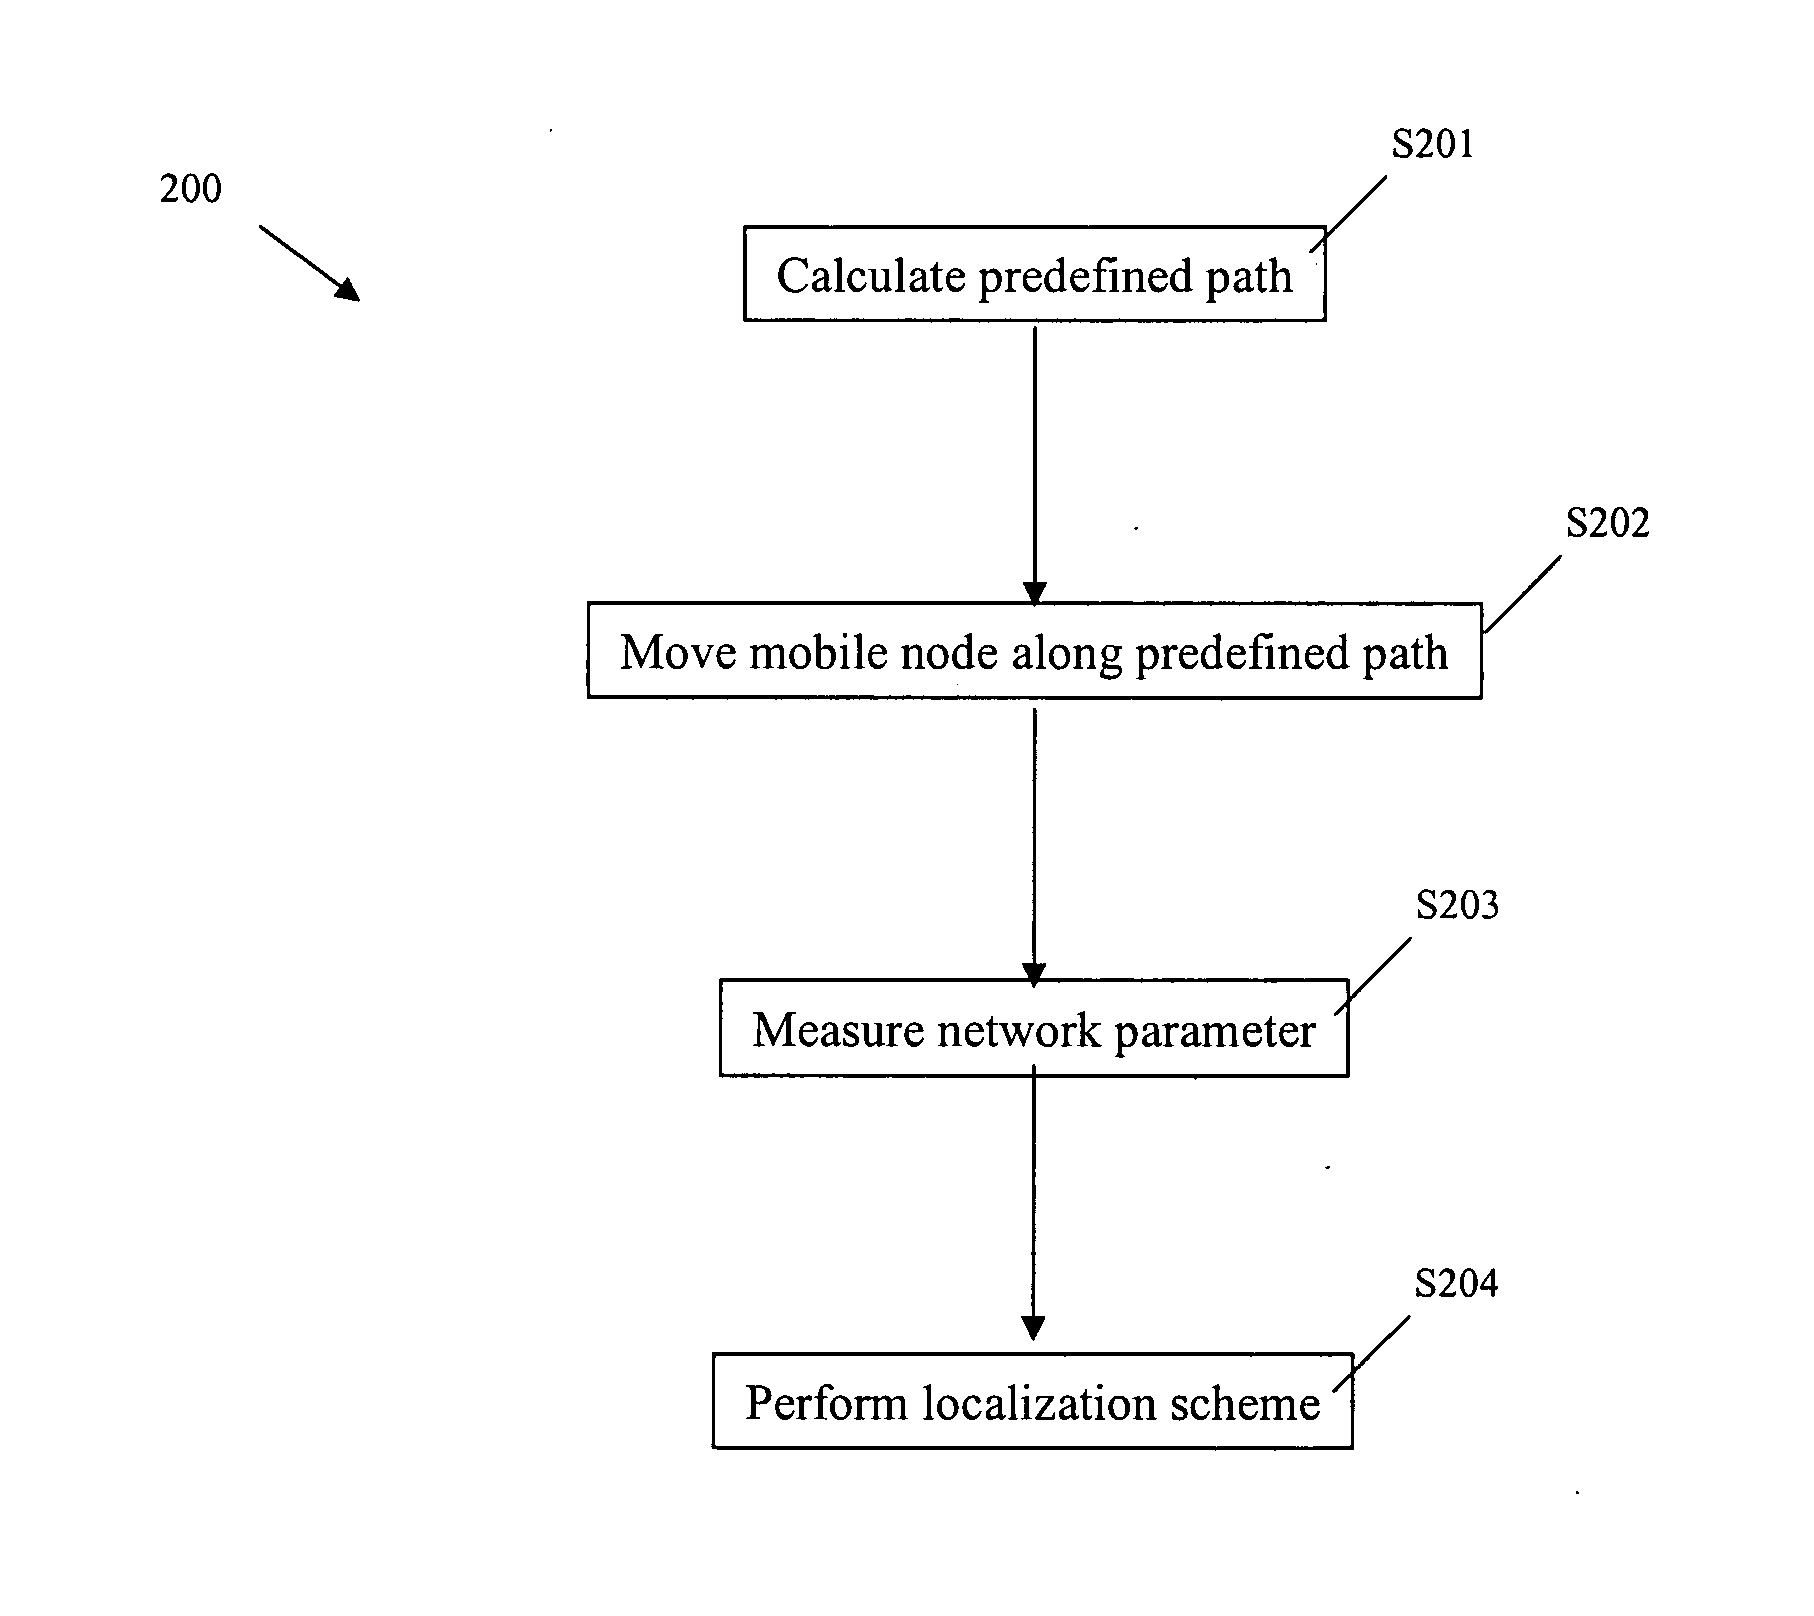 System and method to perform network node localization training using a mobile node